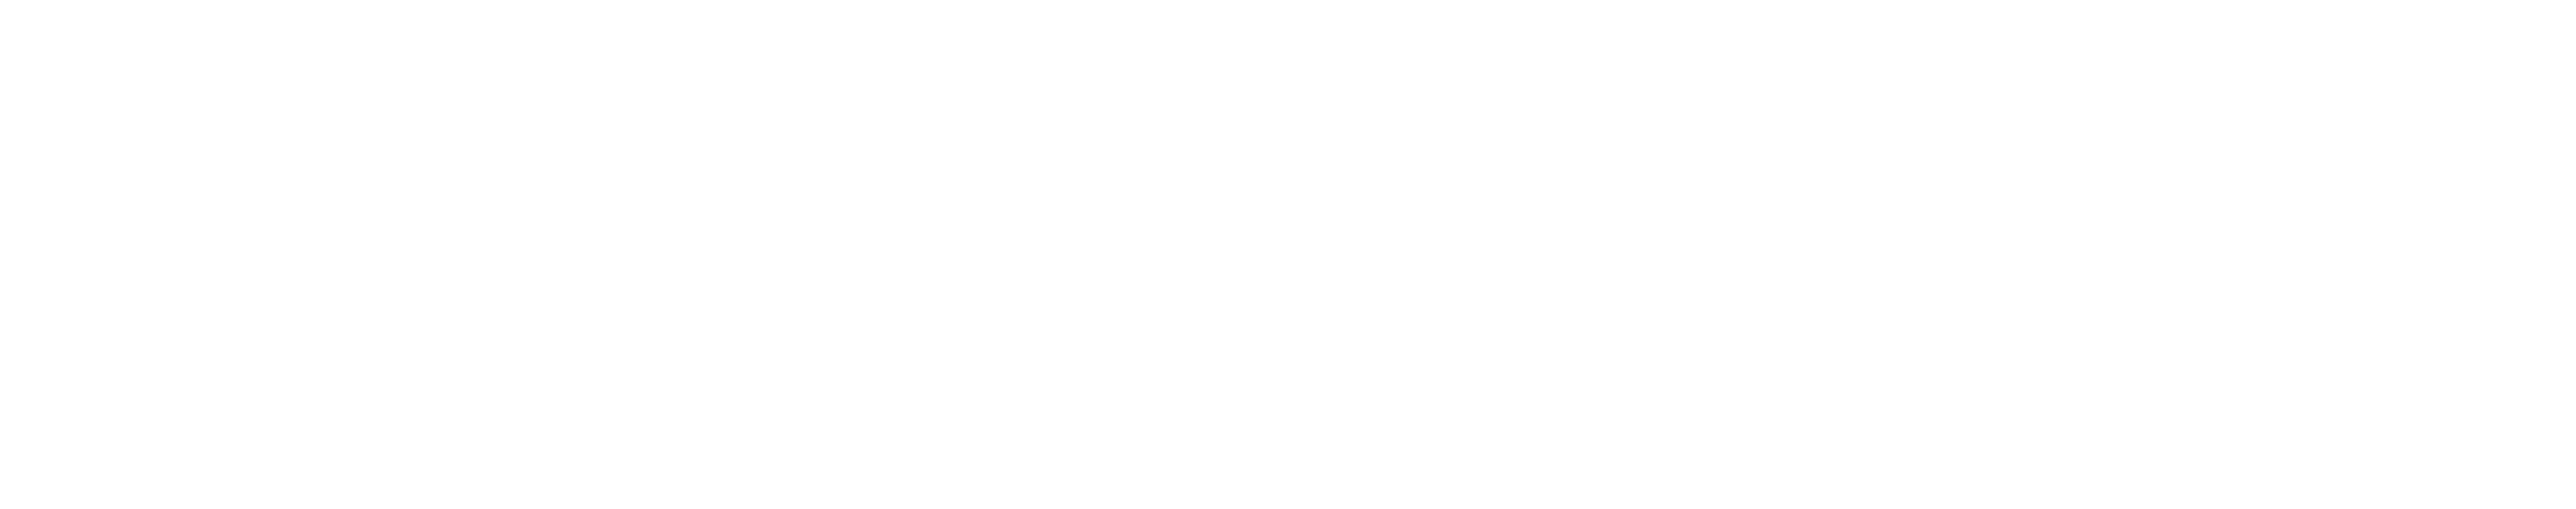 Bounceless Blog | Thoughts, stories and ideas